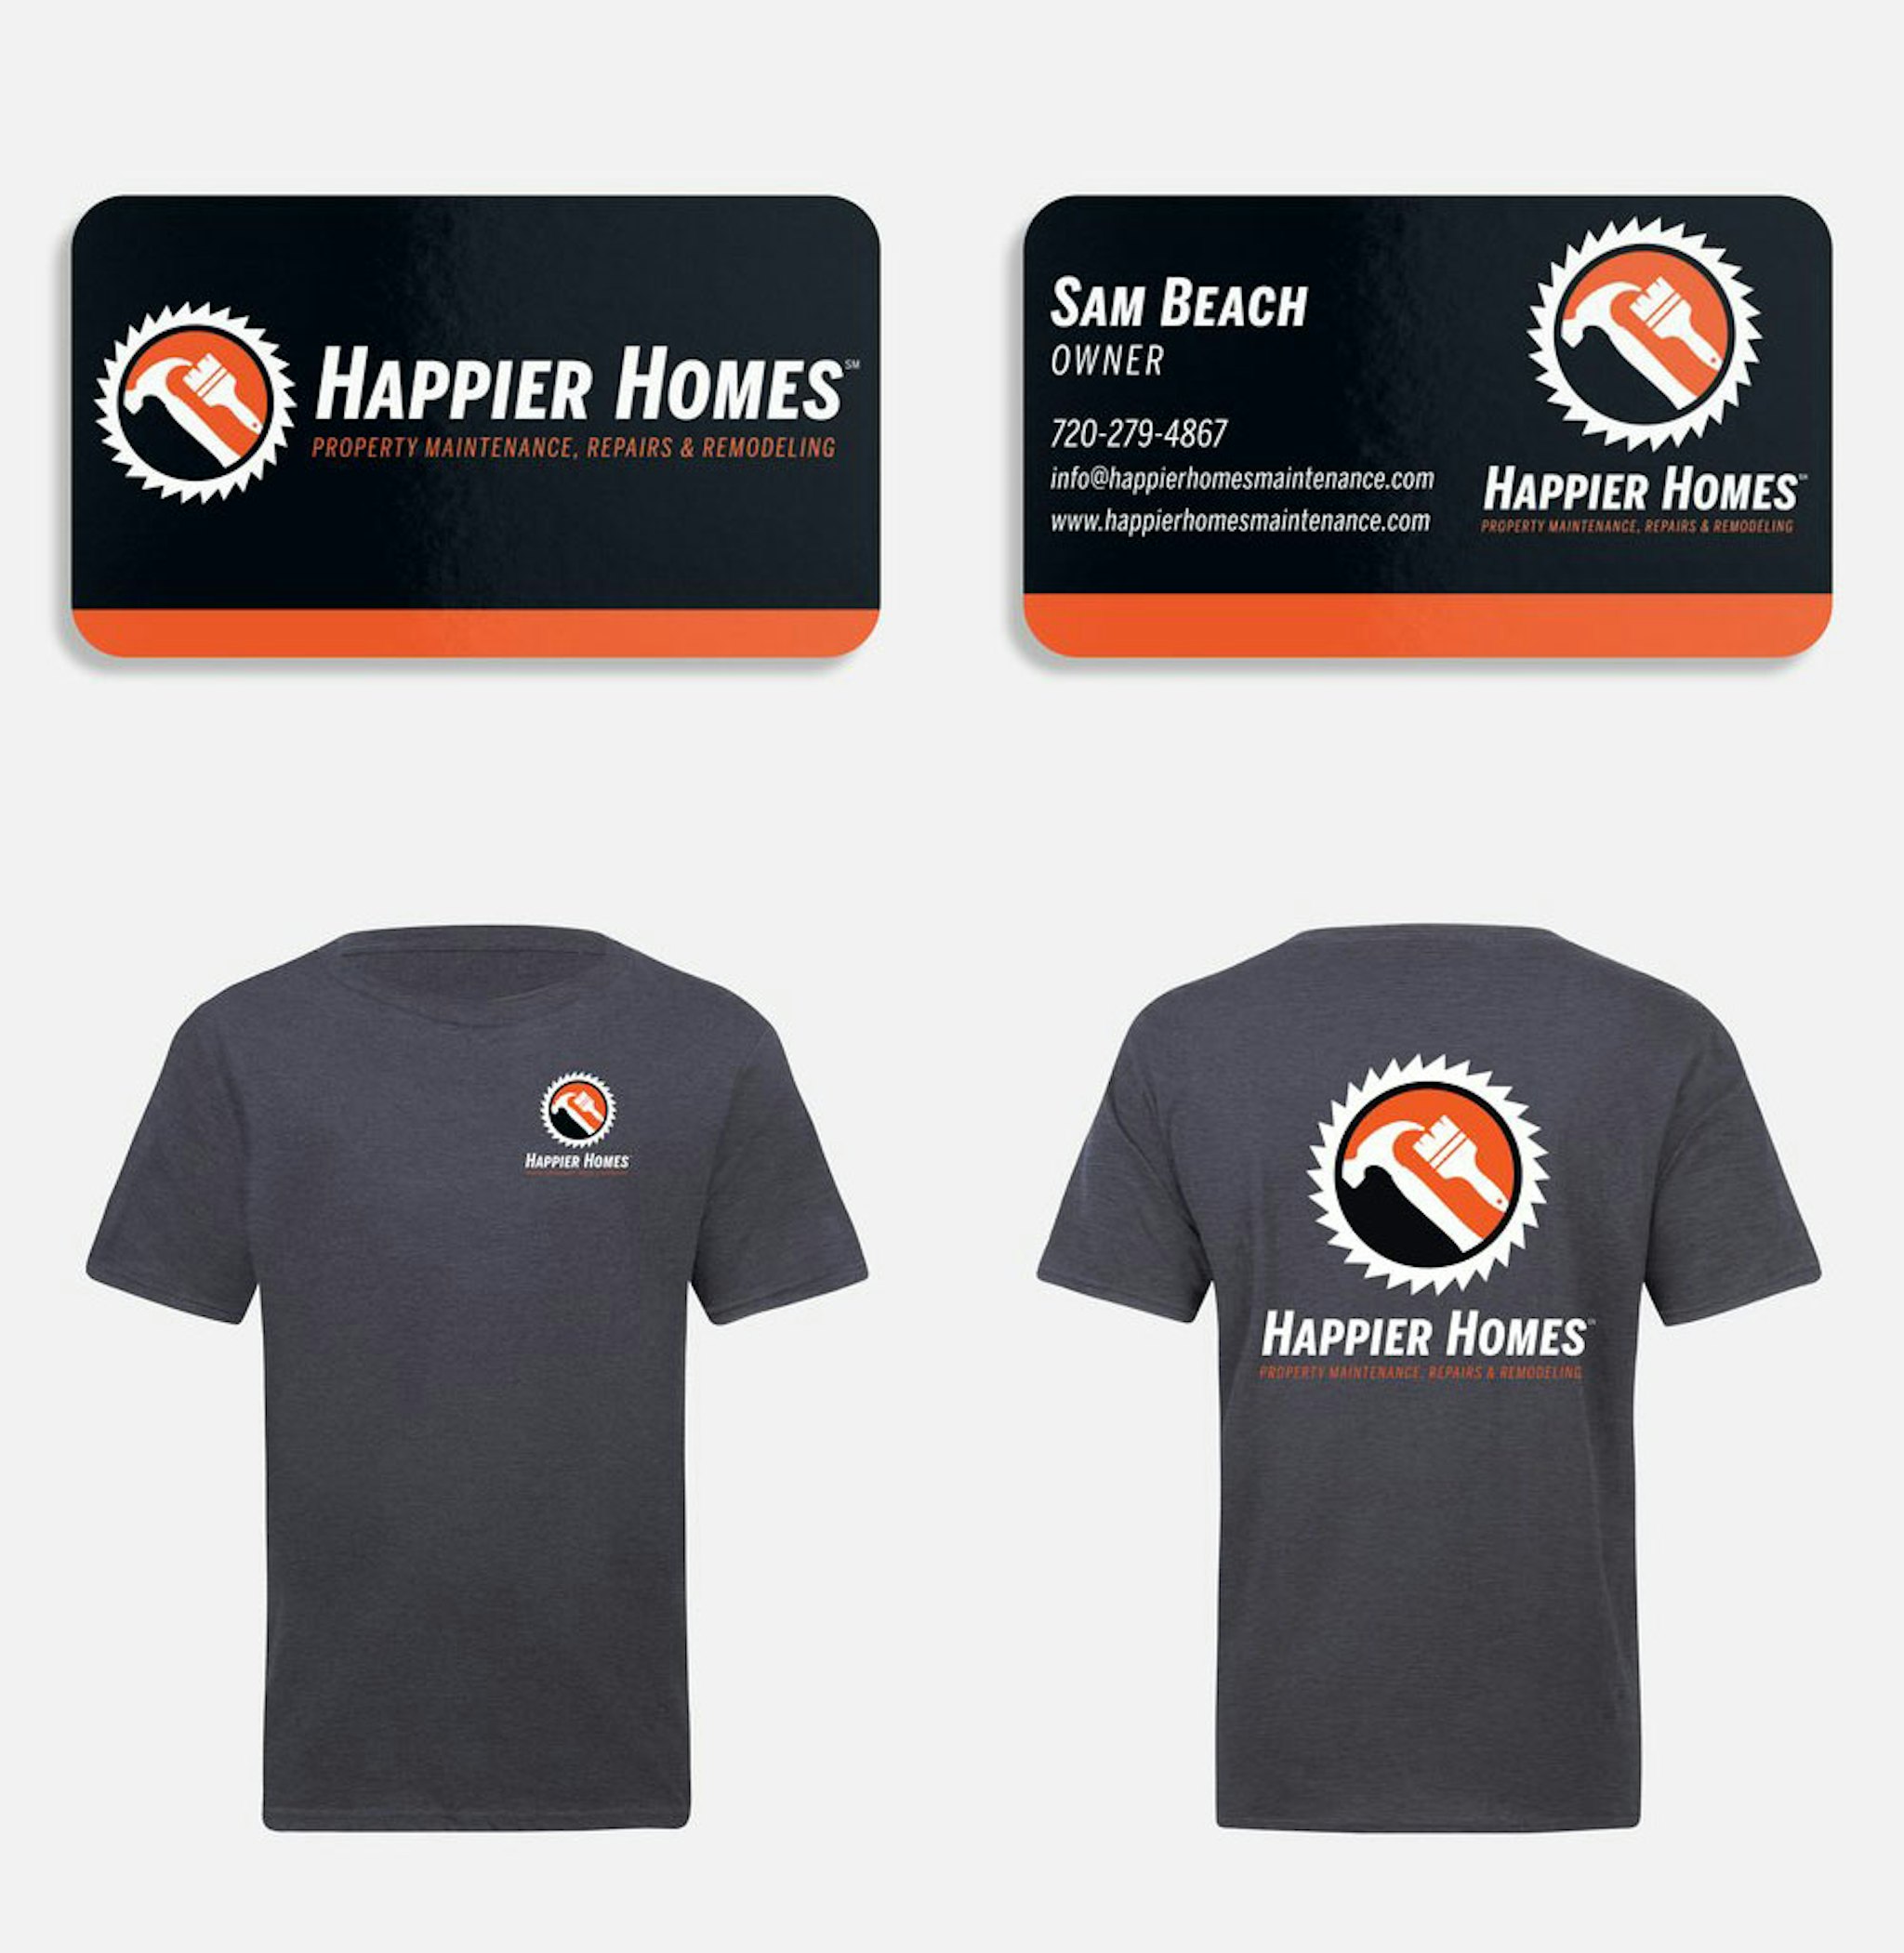 Happier Homes - Cards and T-Shirt Design